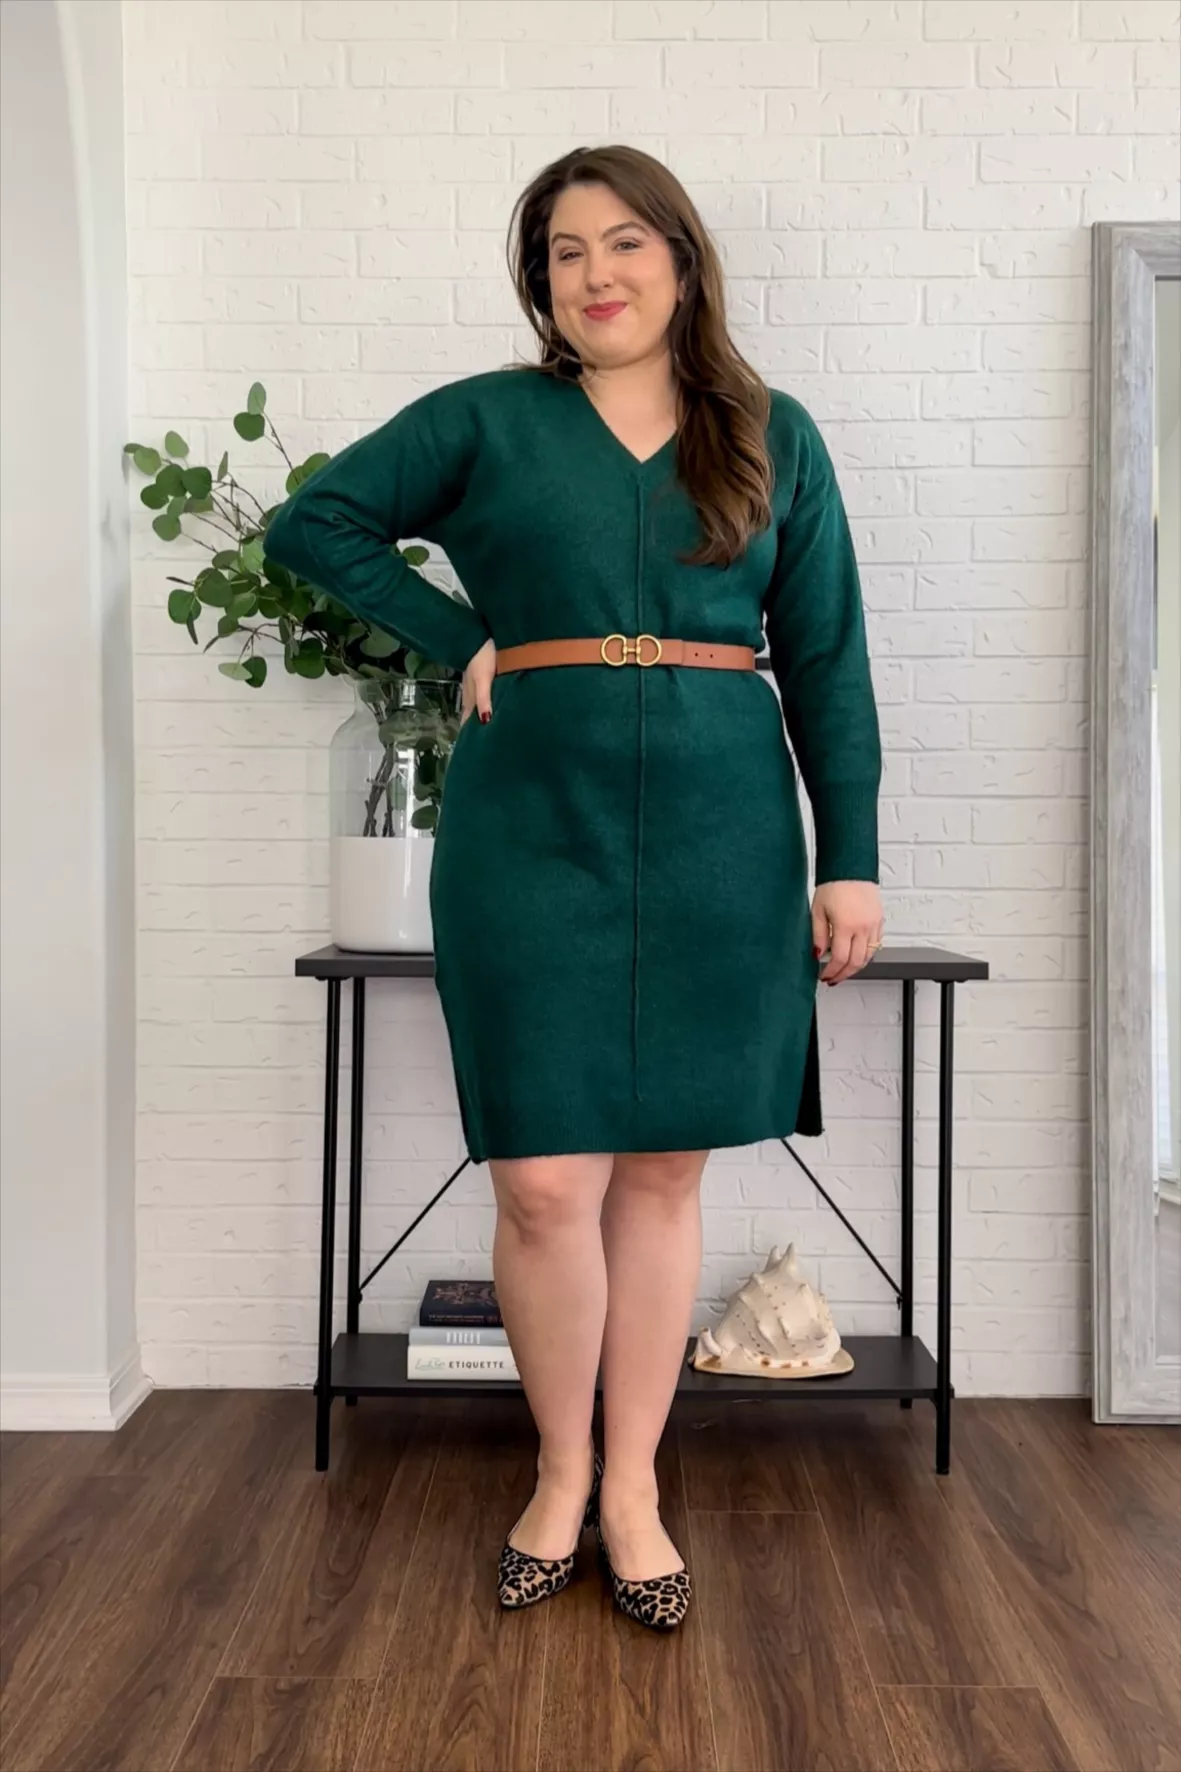 I'm midsize and have three outfits you can wear to the office